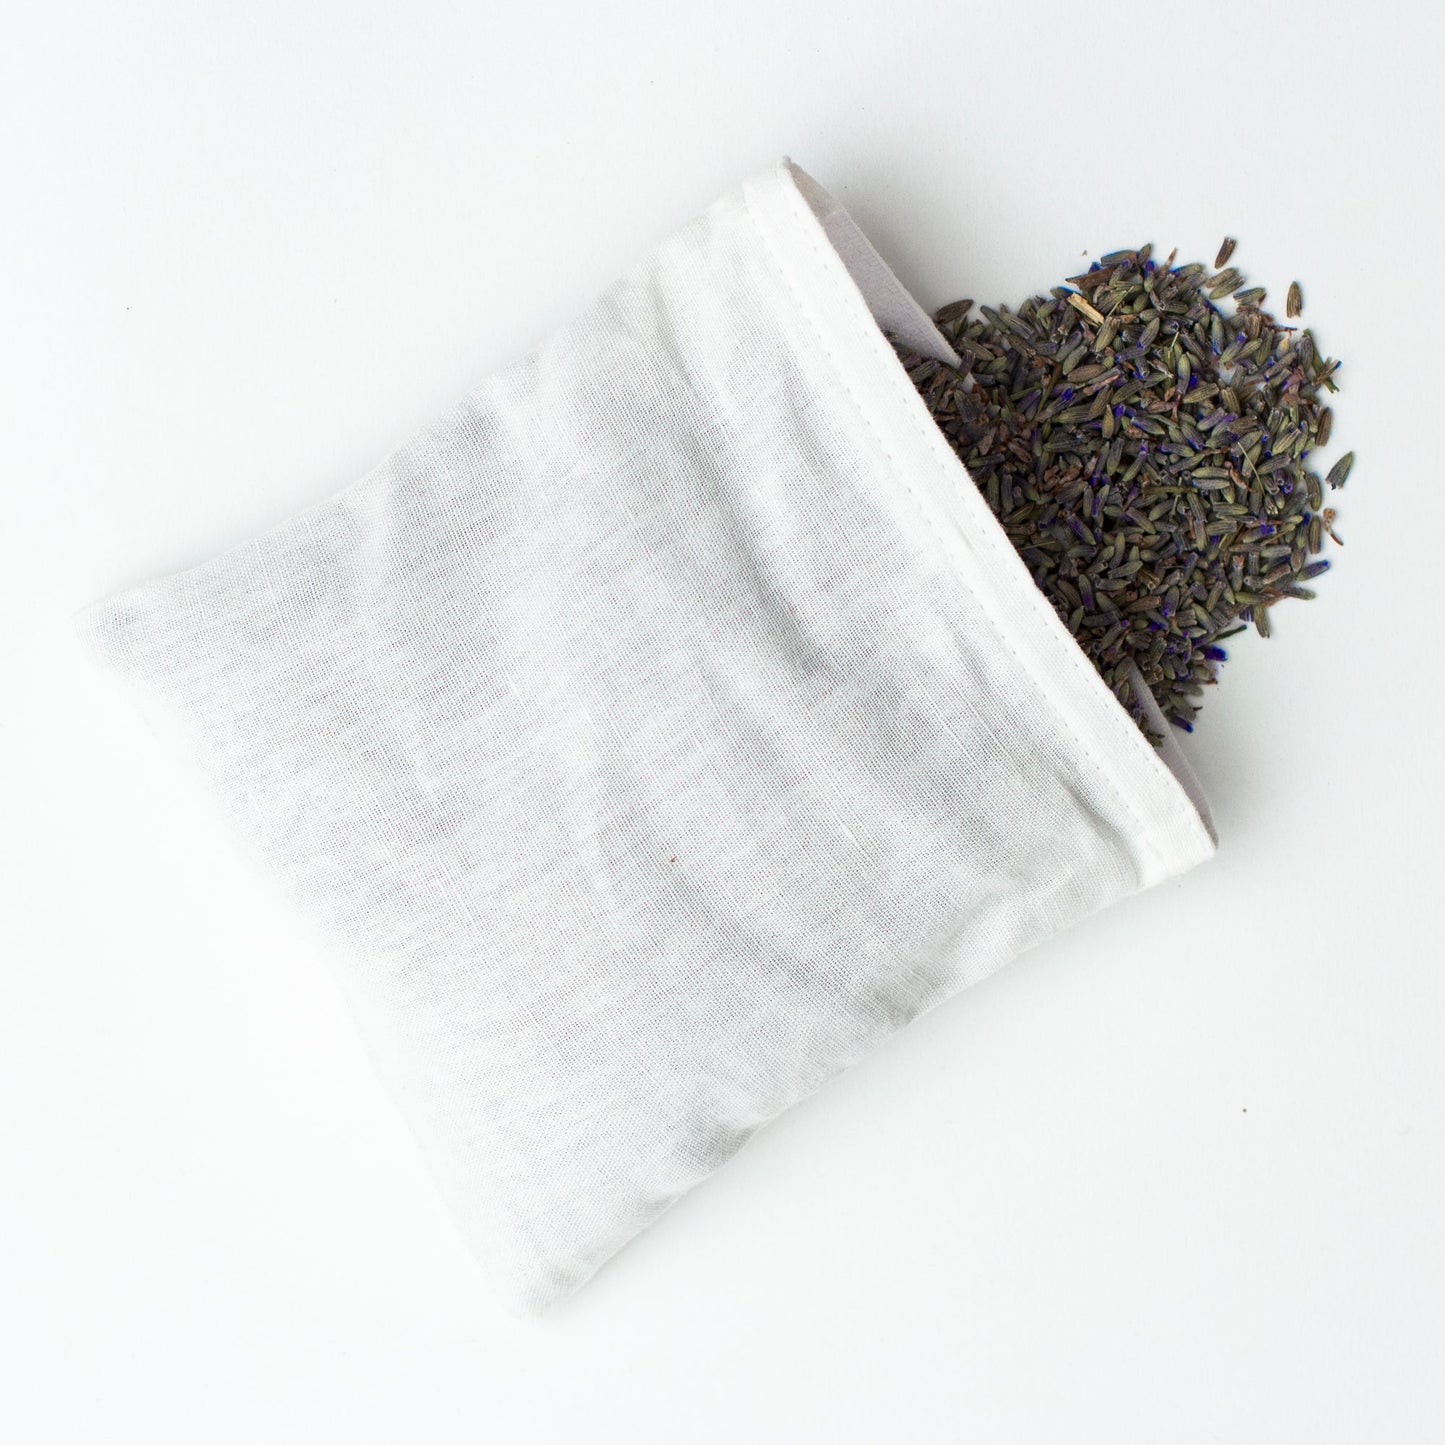 A white linen pouch with lavender spilling out the open side